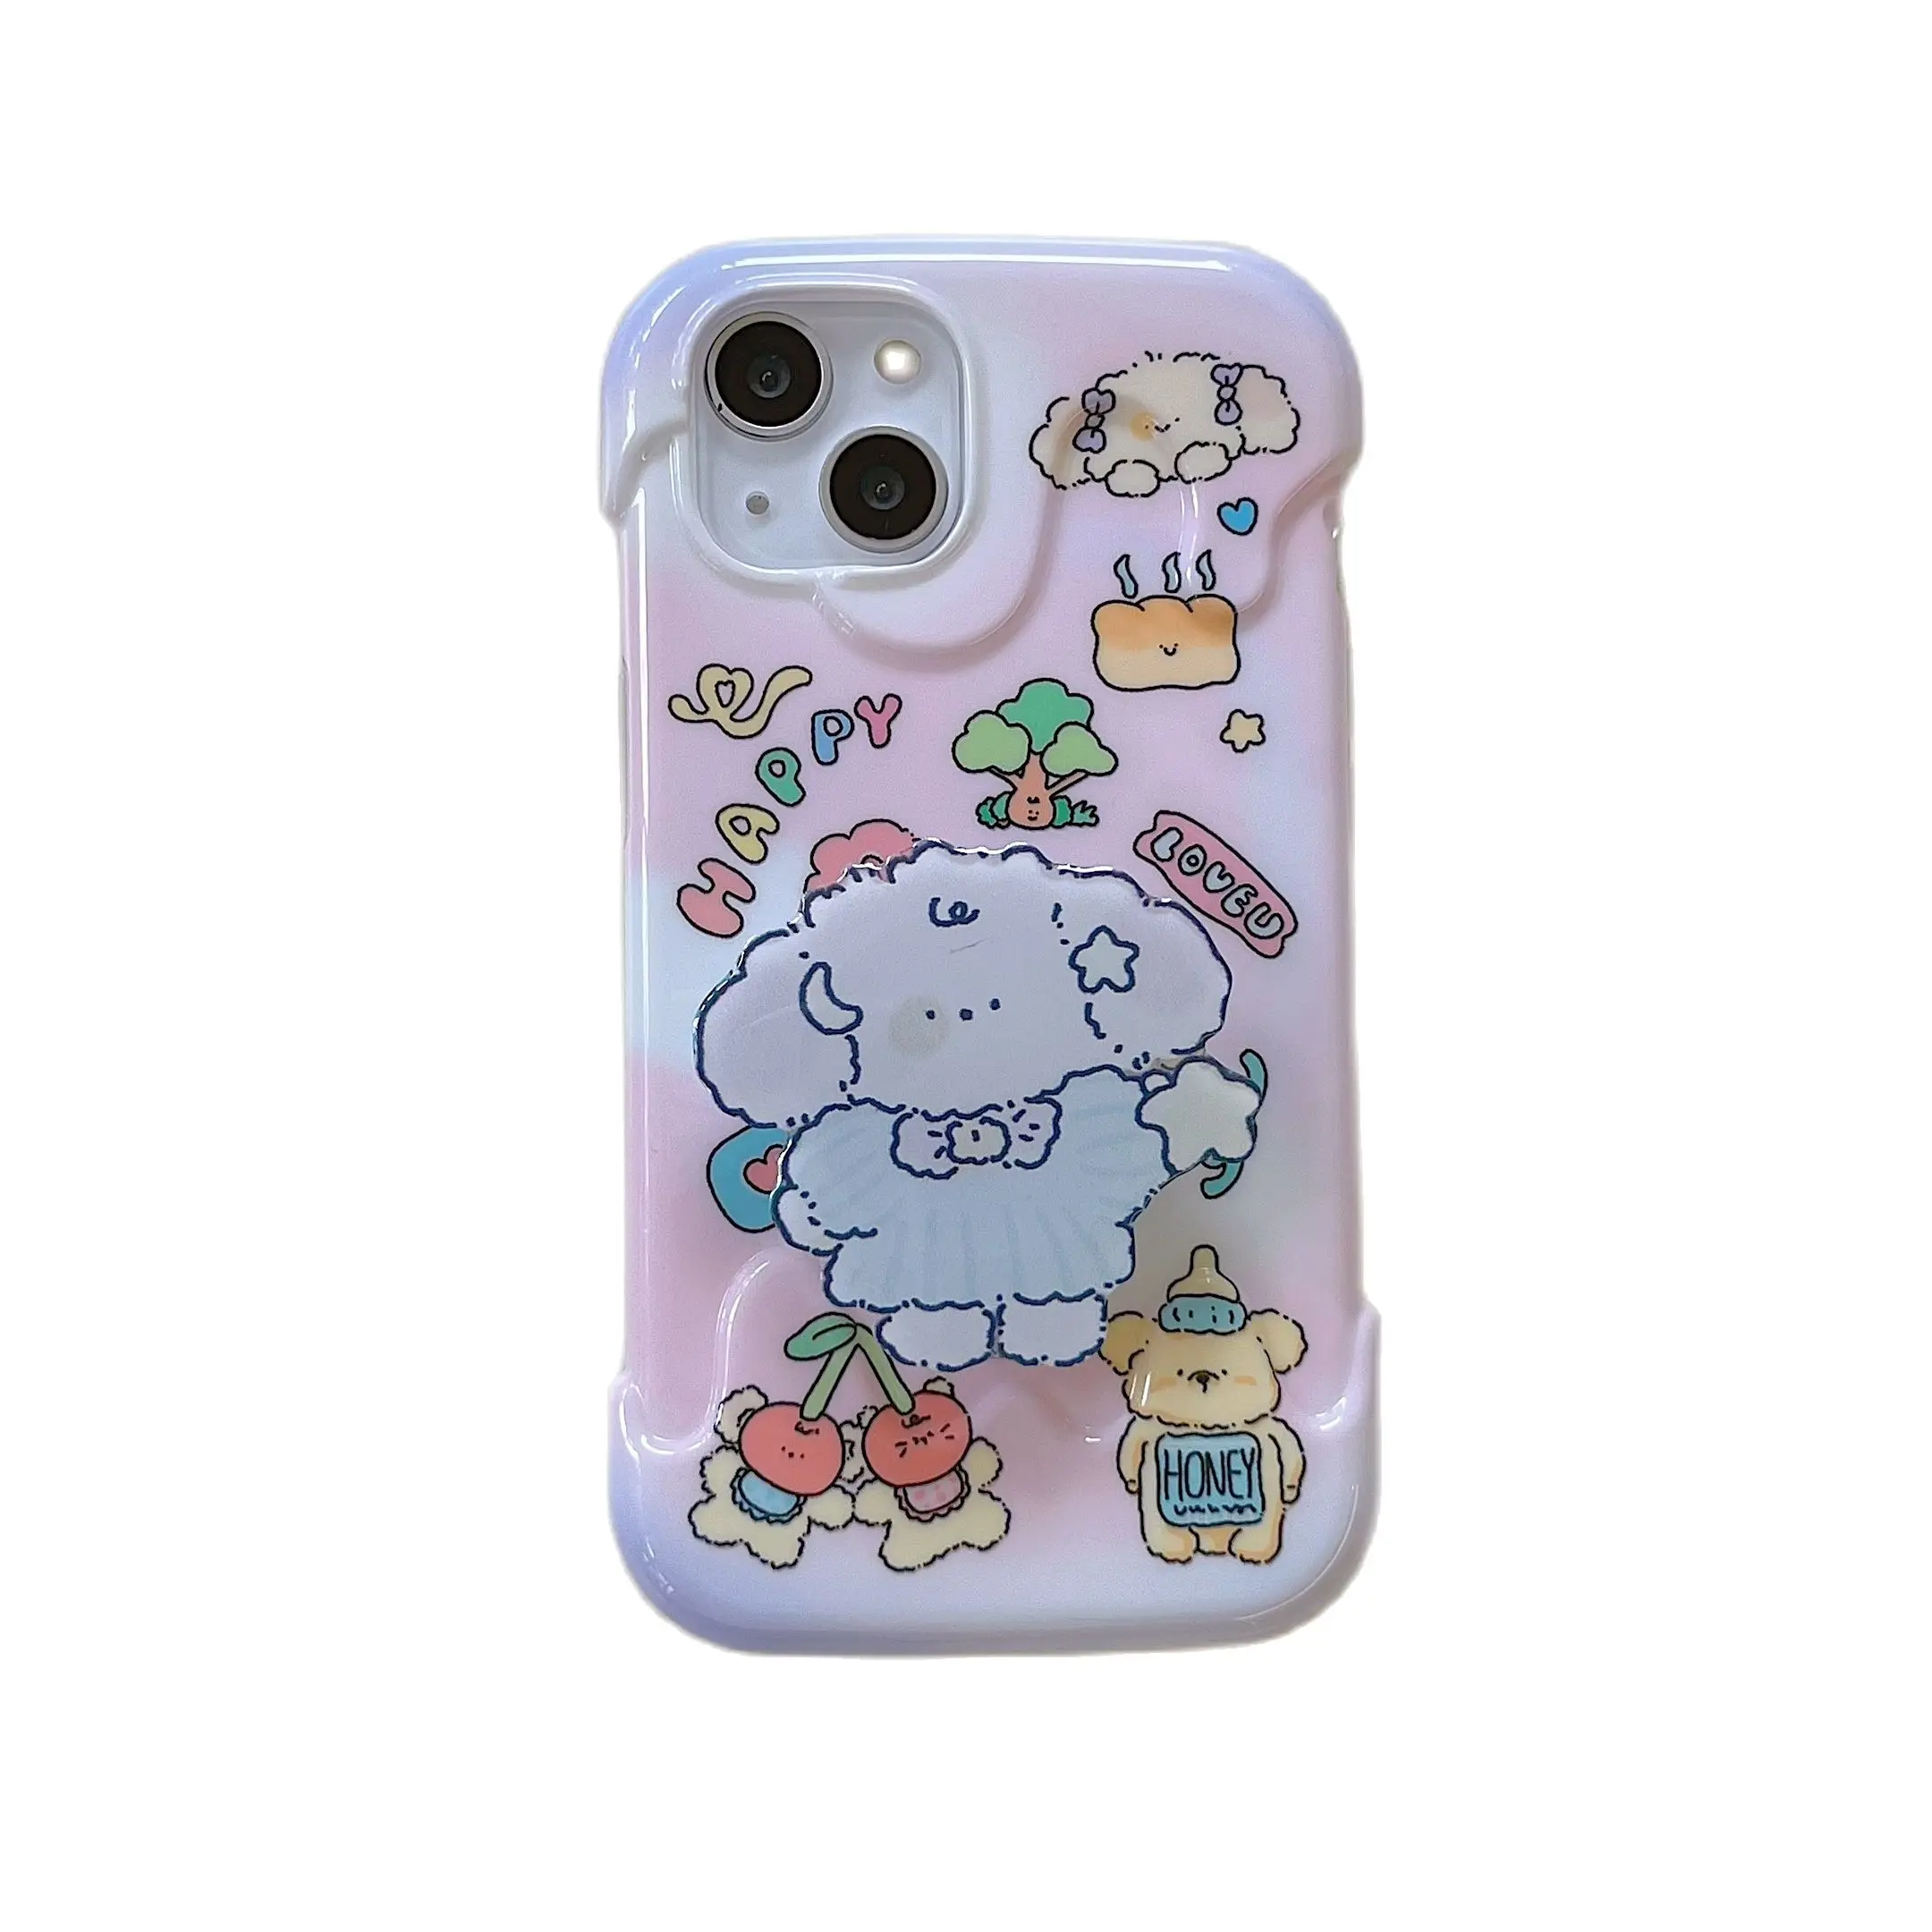 Sunny (Omori), a phone case by Cong ! - INPRNT